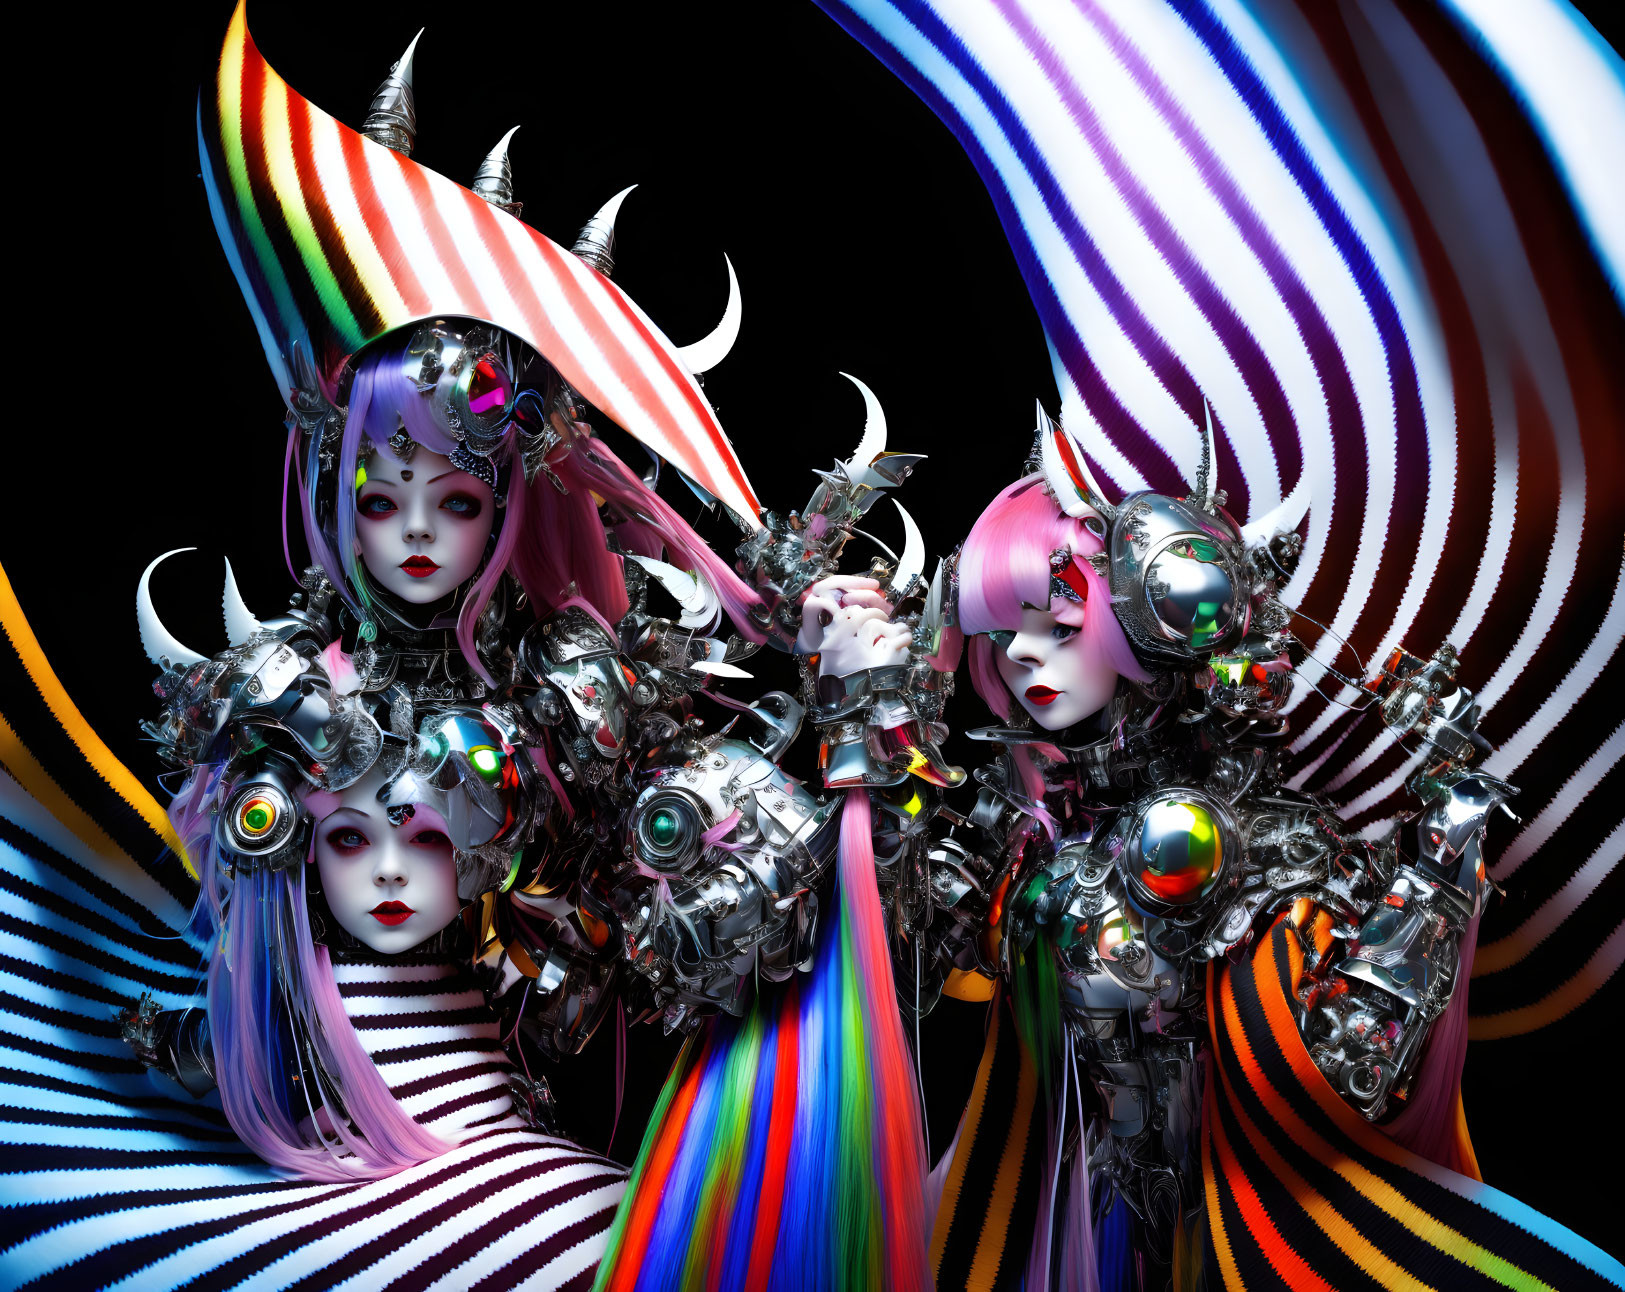 Futuristic female characters in cybernetic suits with vibrant striped patterns